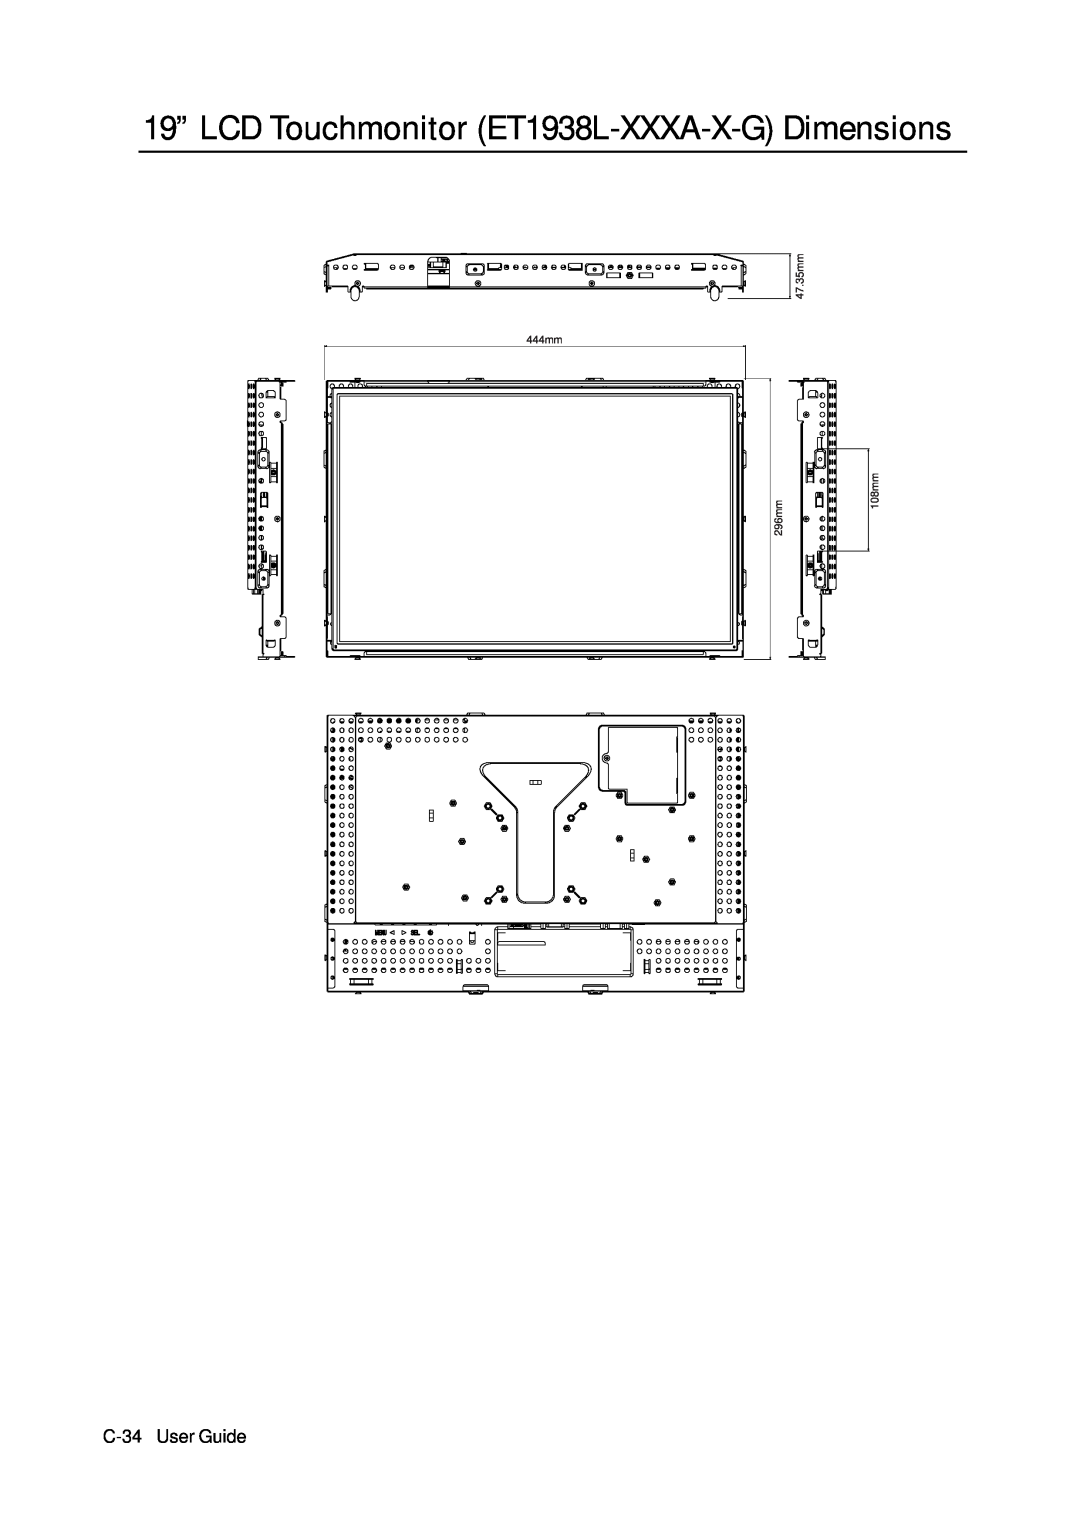 Tyco Electronics manual 19” LCD Touchmonitor ET1938L-XXXA-X-G Dimensions, C-34 User Guide, 47.35mm 444mm 296mm, 108mm 